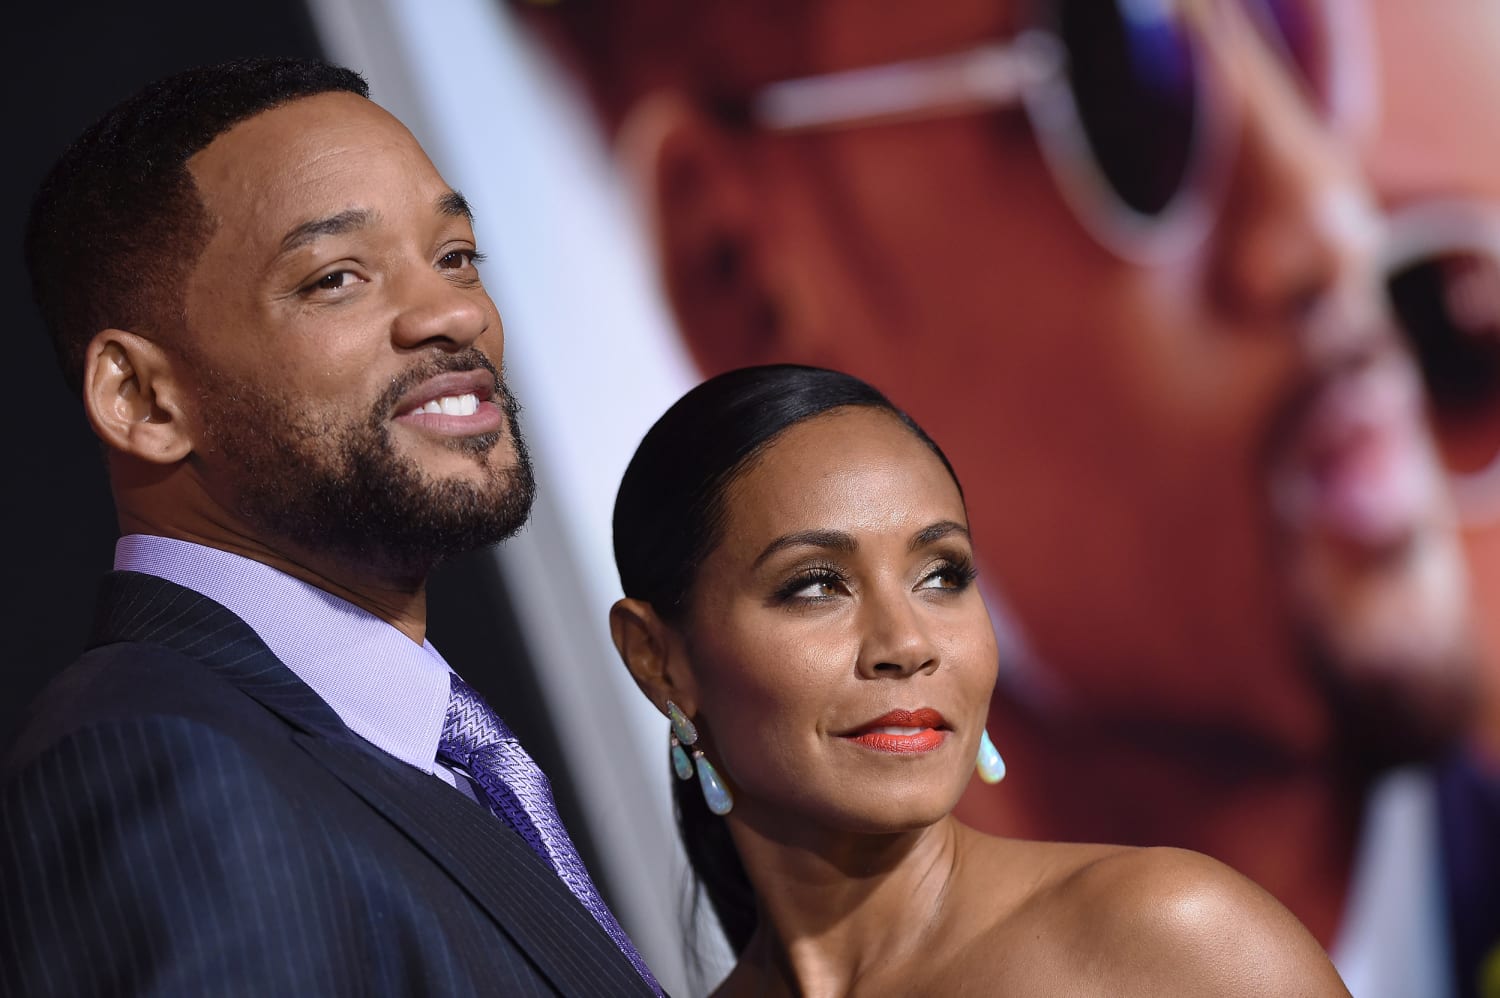 Jada Pinkett Smith Will Smith's emotional 'Red Table Talk' demonstrates their business savvy